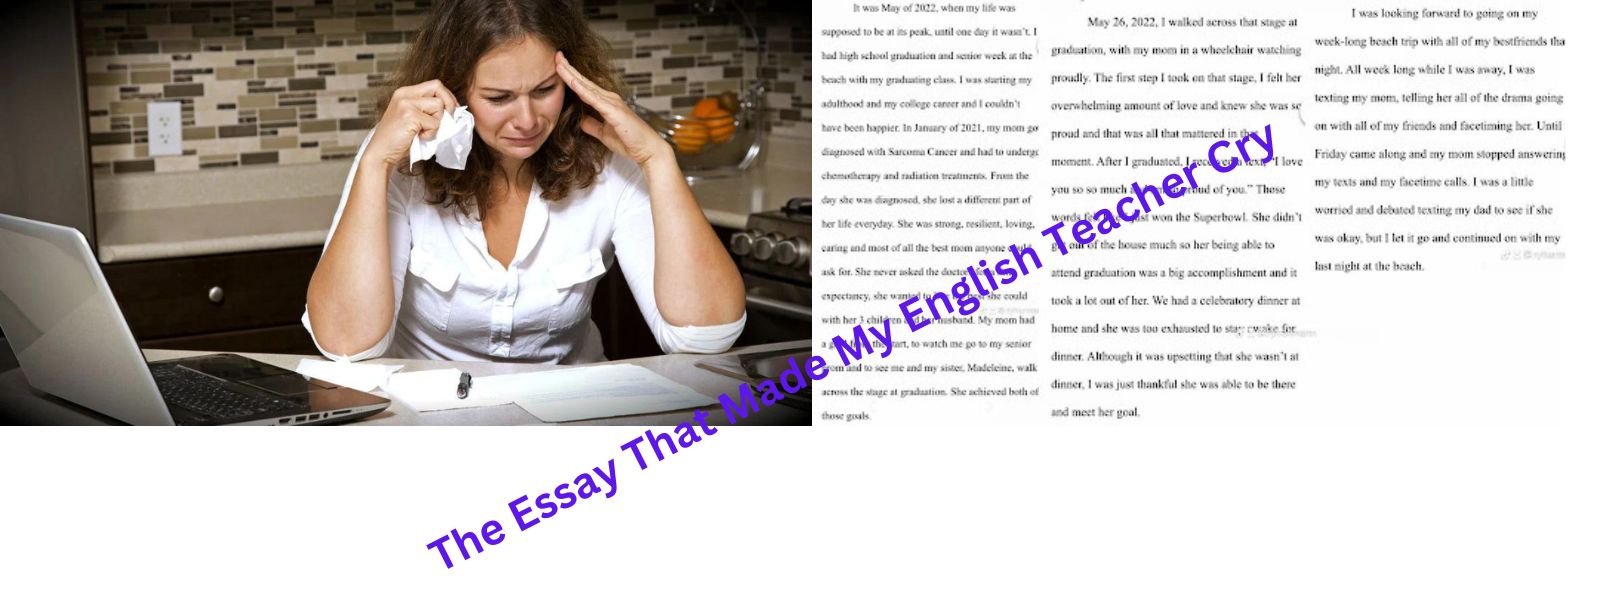 he essay that made my English teacher cry